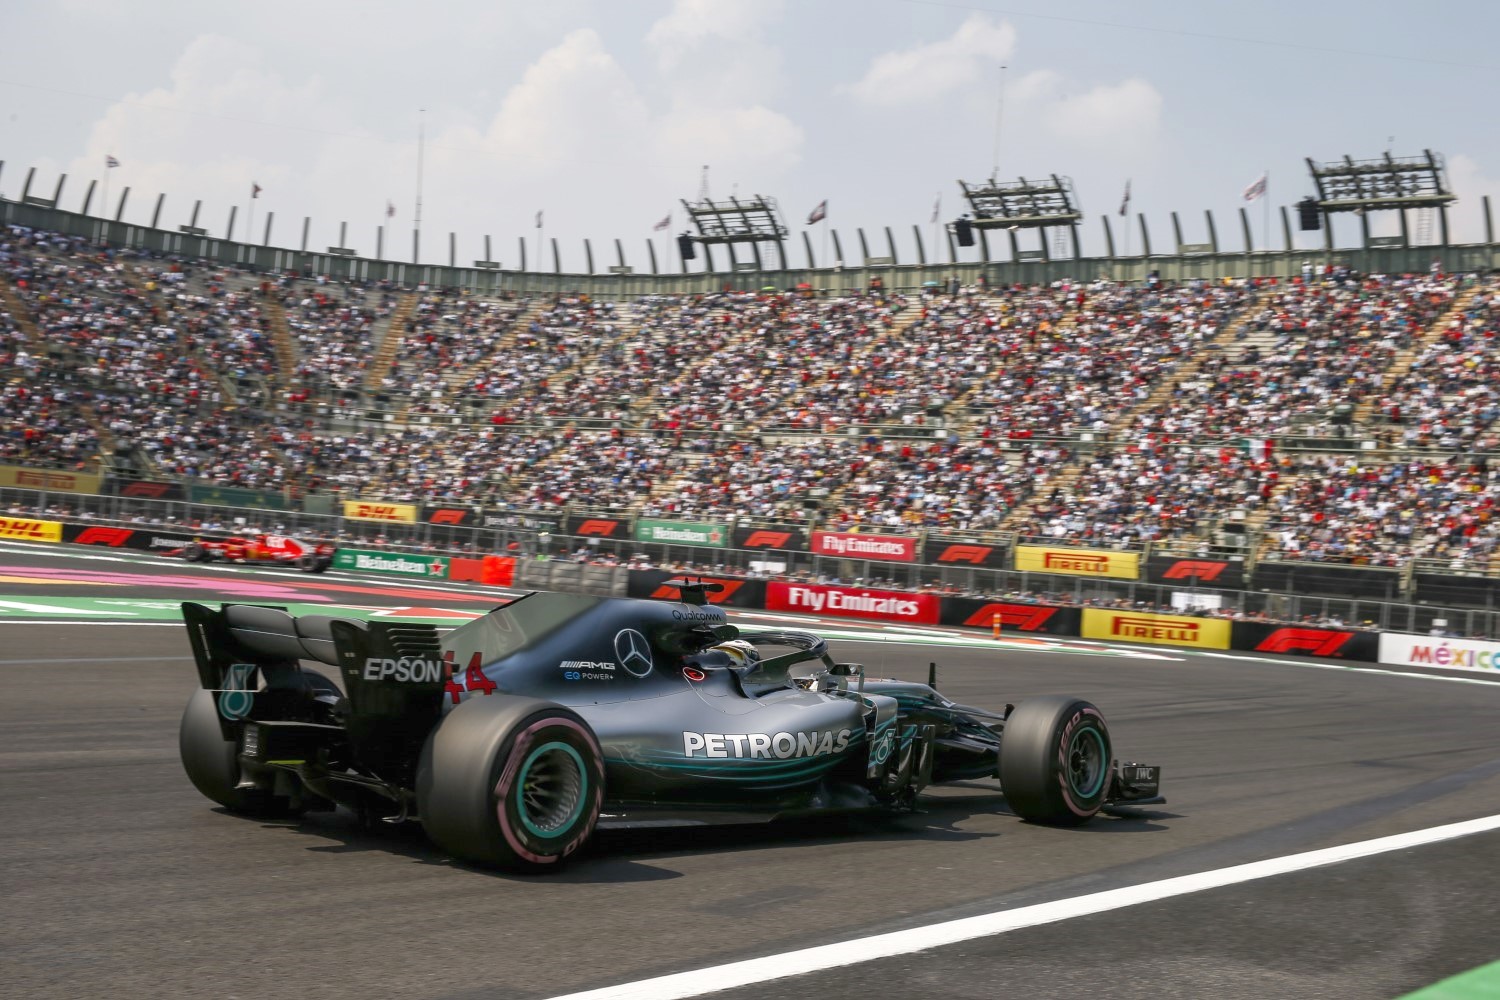 Hamilton speeds in front of big Friday crowd